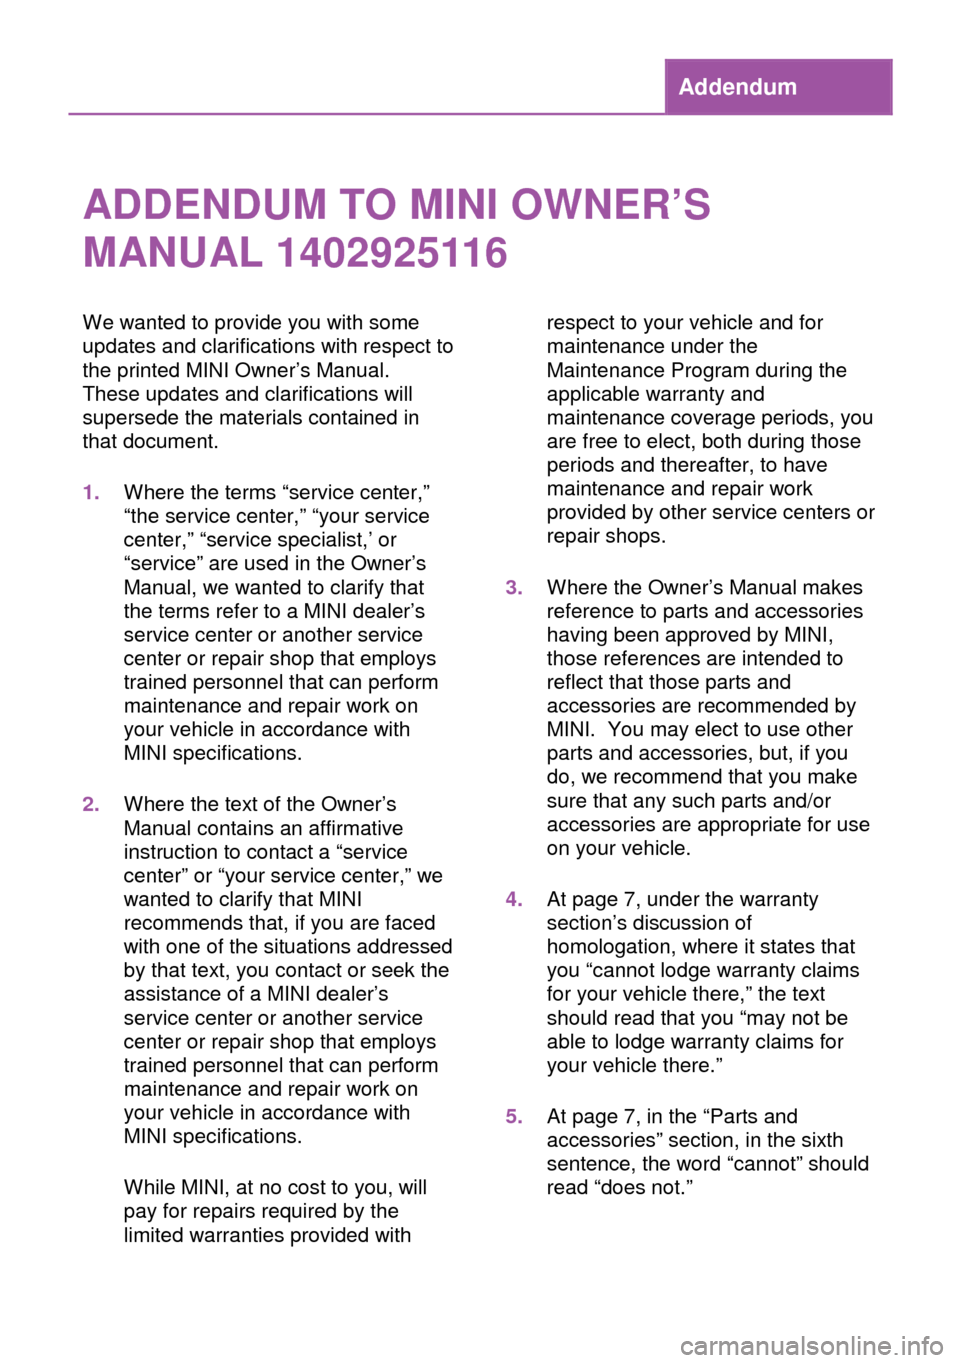 MINI 3 door 2013  Owners Manual Addendum
ADDENDUM TO MINI OWNER’S
MANUAL 1402925116
We wanted to provide you with some
updates and clarifications with respect to
the printed MINI Owner’s Manual.
These updates and clarifications 